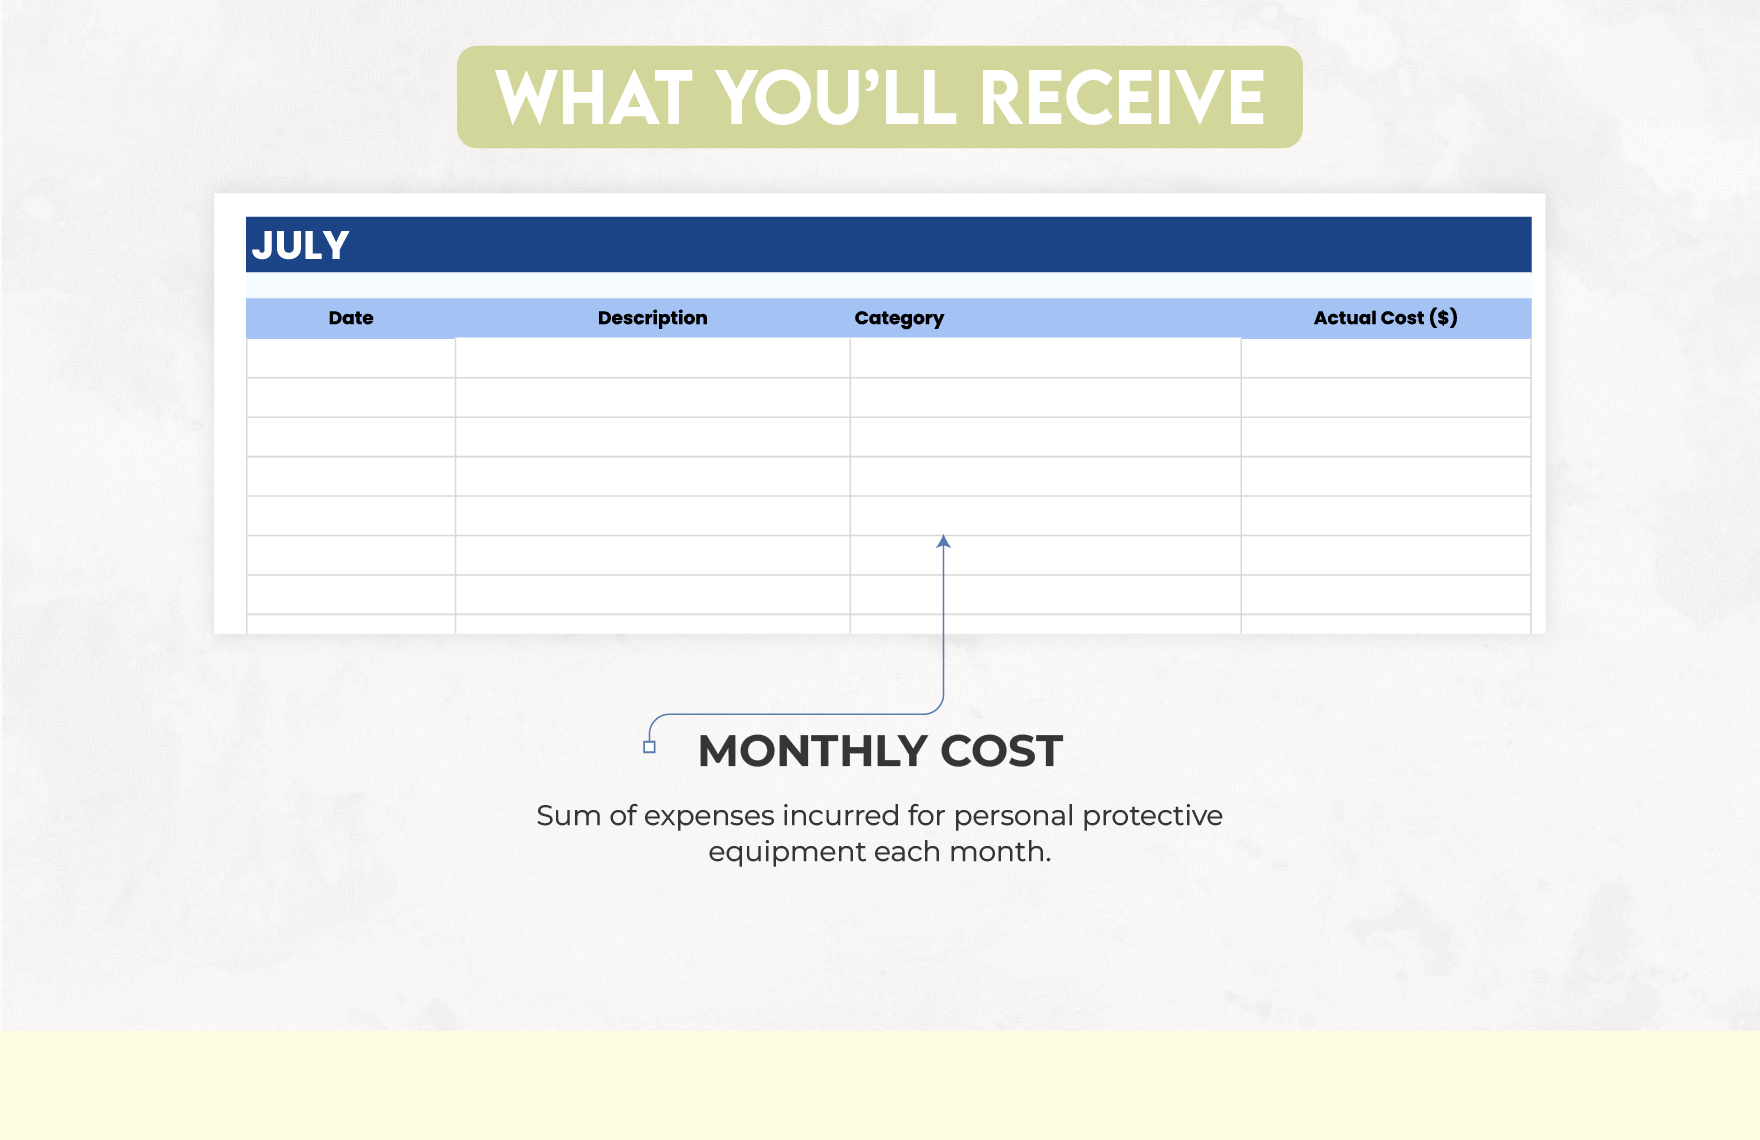 PPE Budgeting and Cost Analysis Template